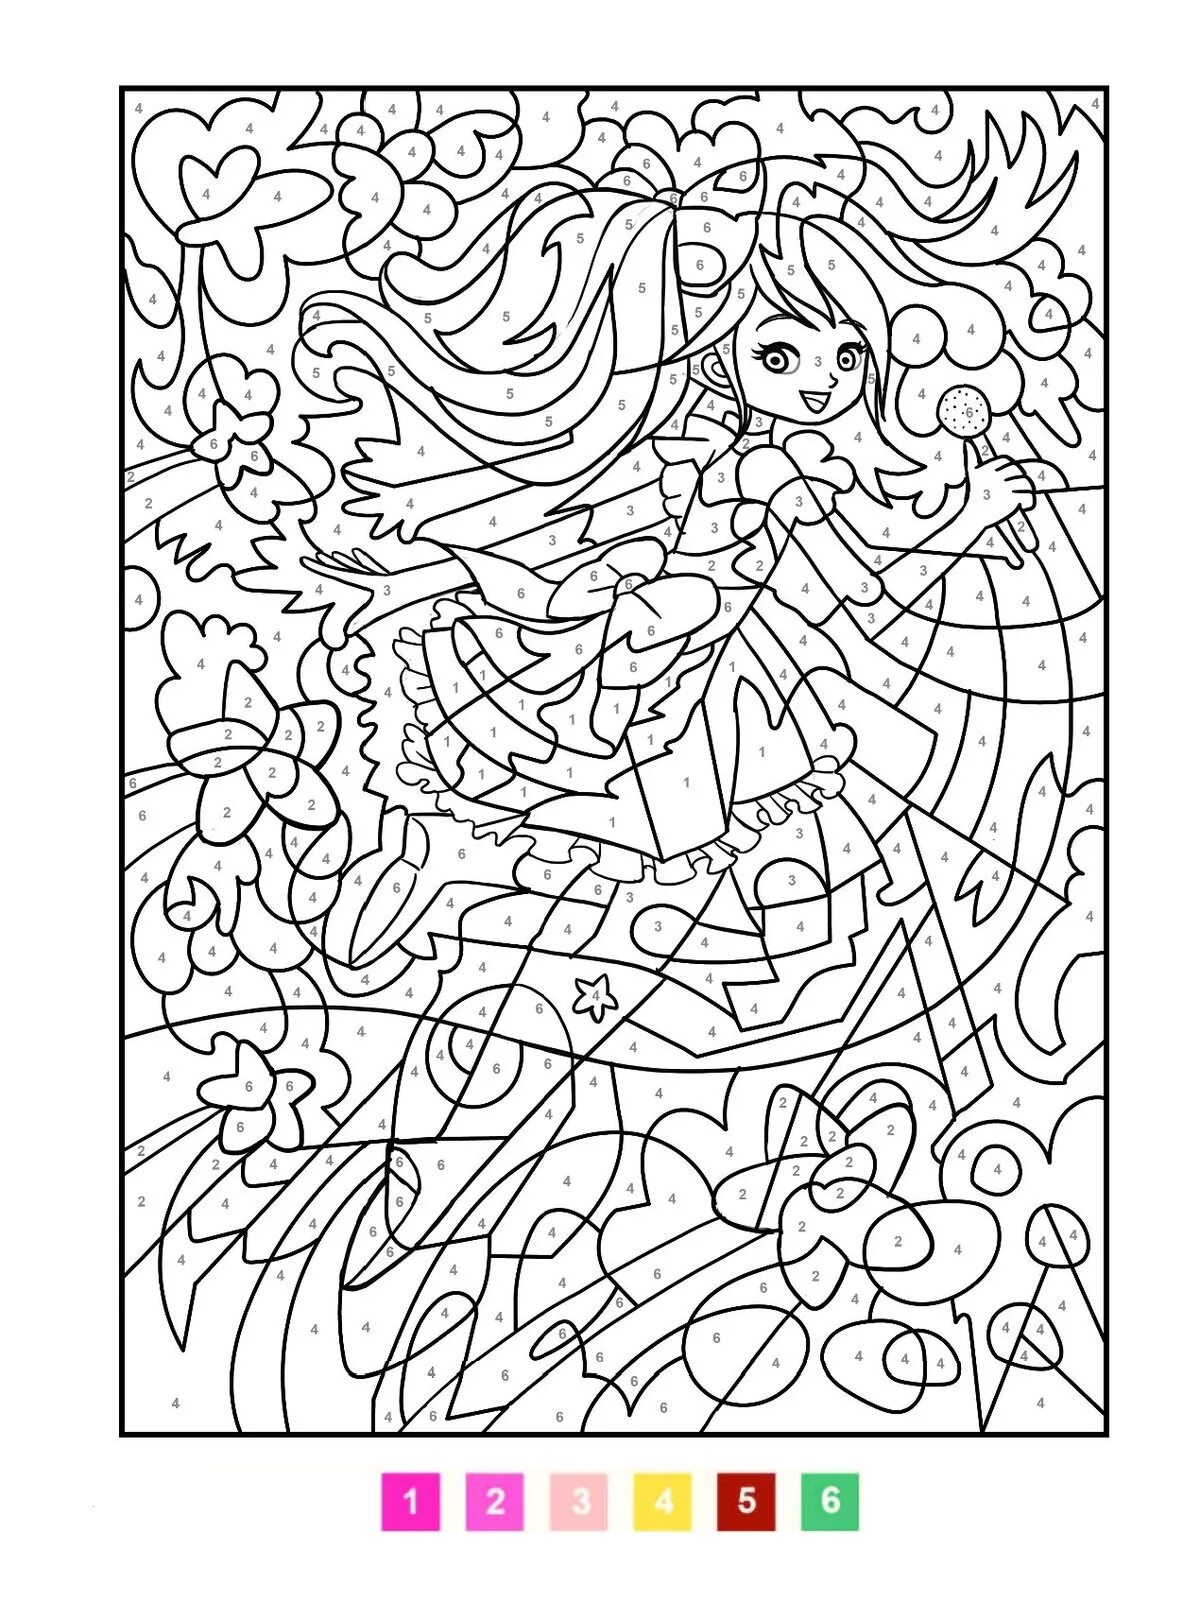 Coloring pages with fun numbers